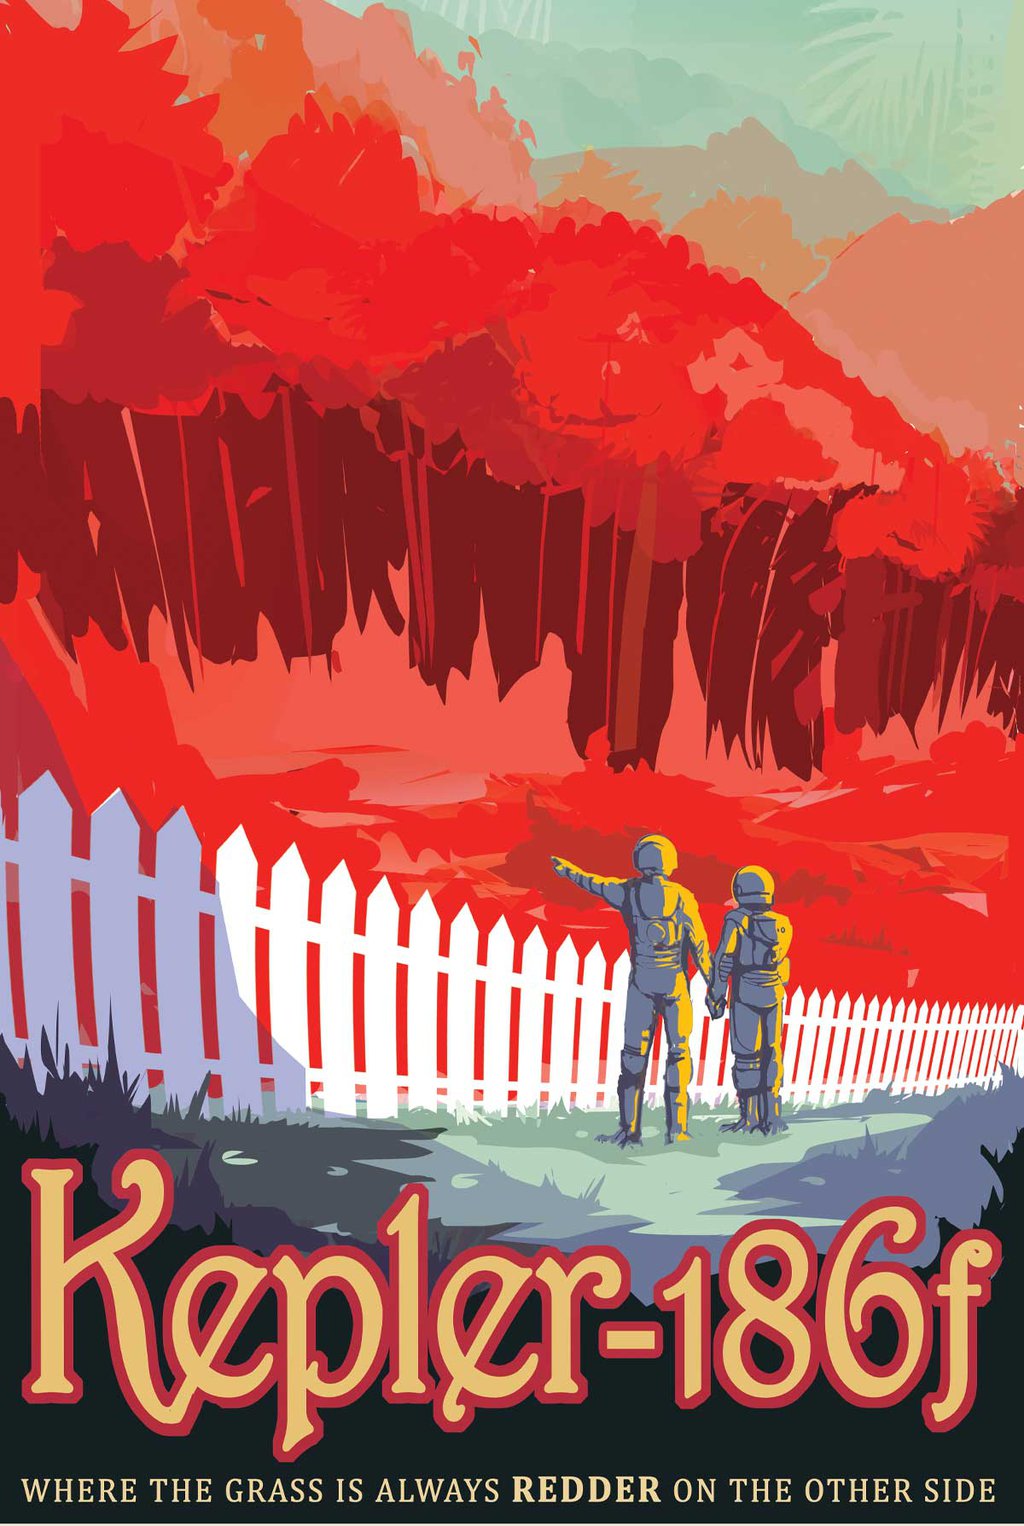 Kepler-186f - JPL Travel Poster - Visions of the Future Collection